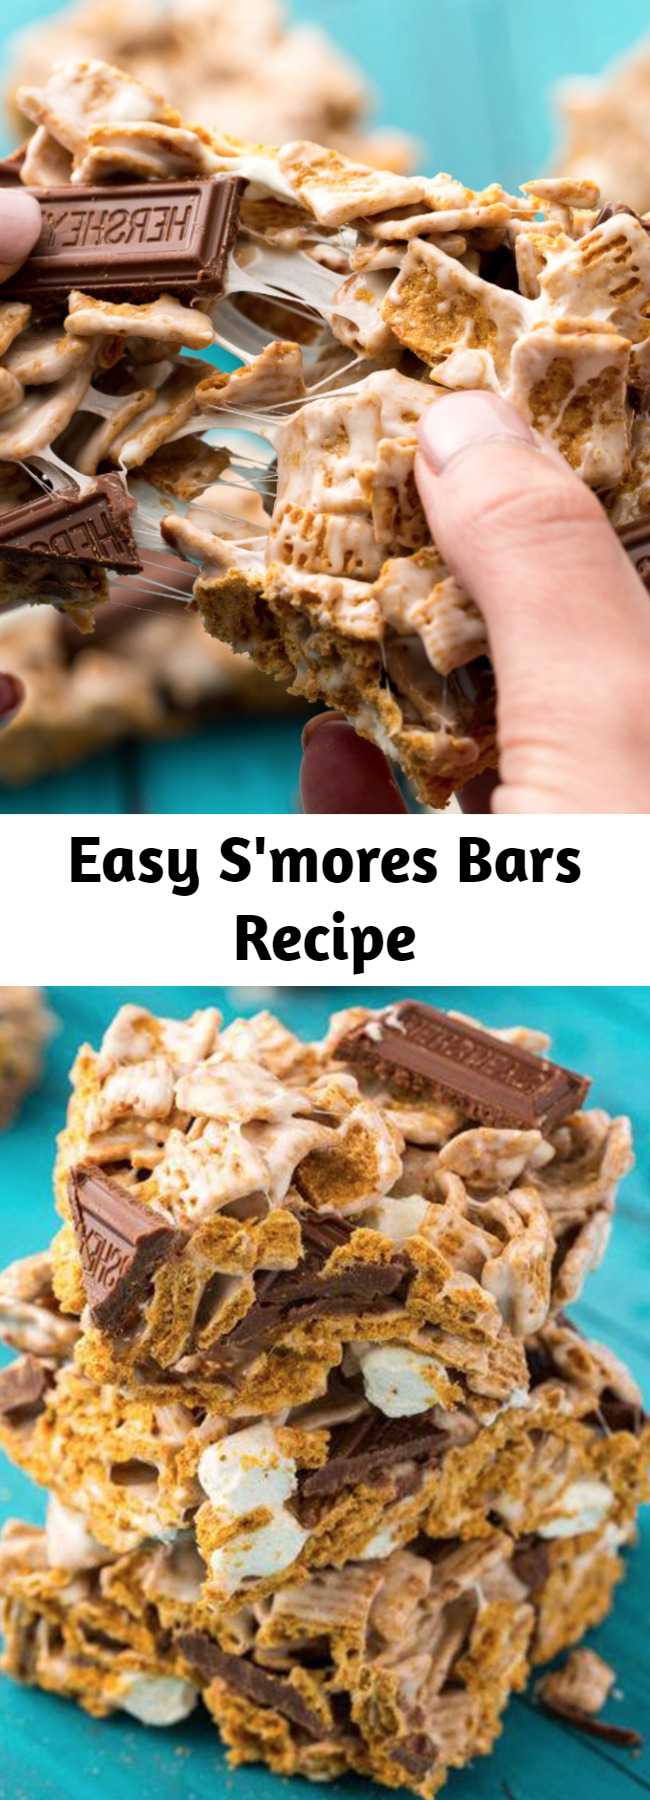 Easy S'mores Bars Recipe - These S'mores Krispie Treats are the best summer dessert!